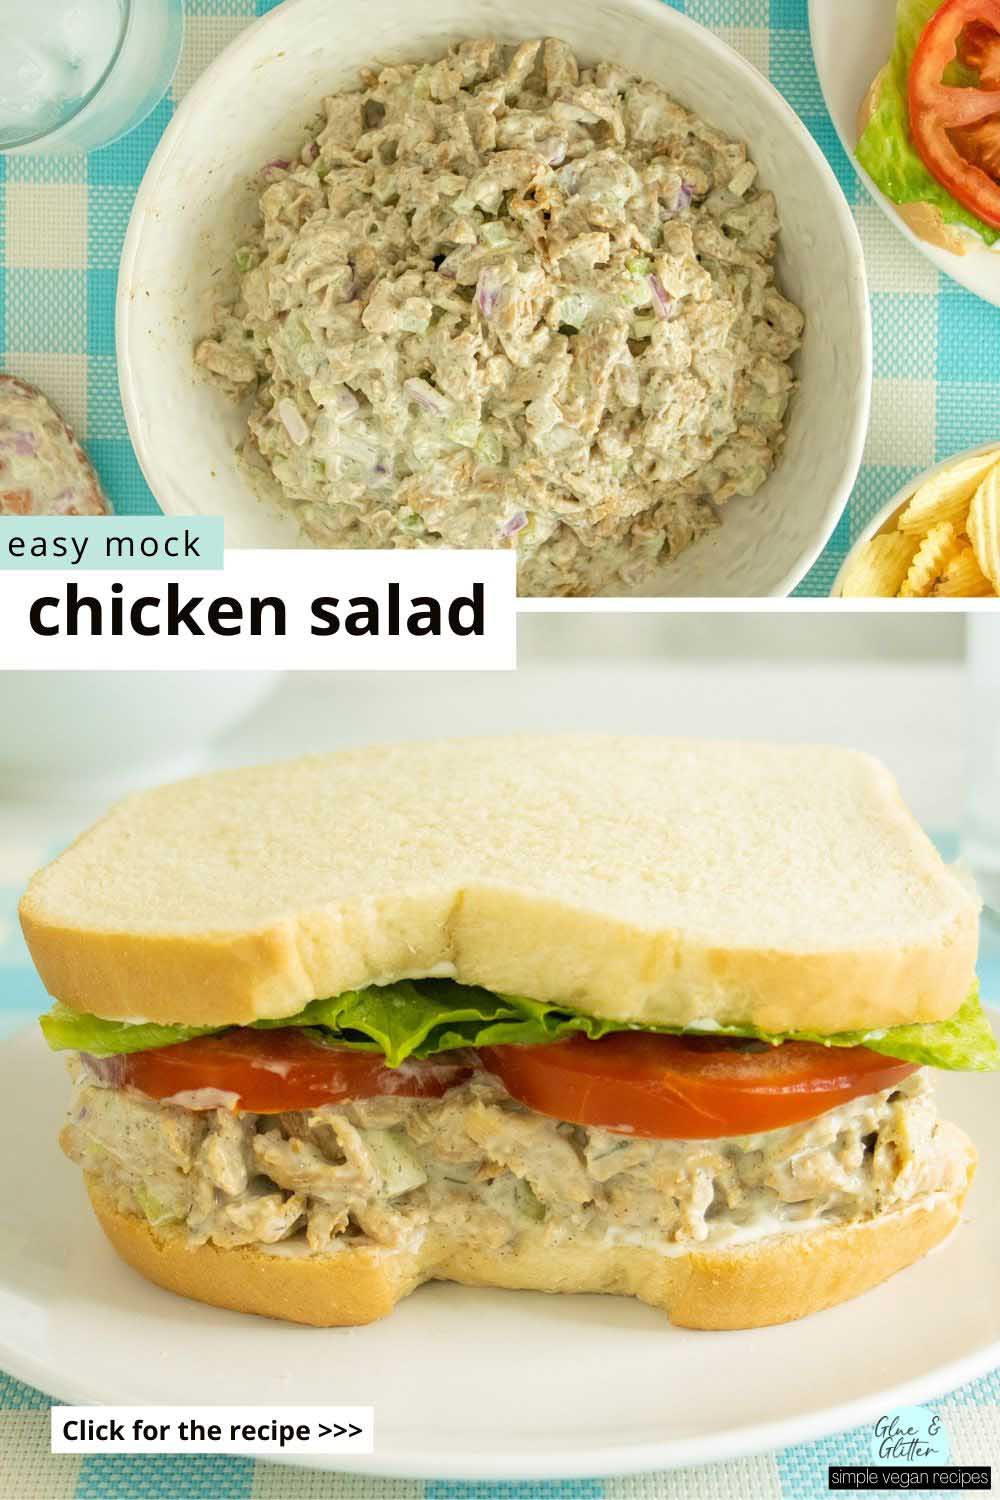 image collage of the vegan chicken salad in a bowl and a mock chicken salad sandwich with lettuce and tomato